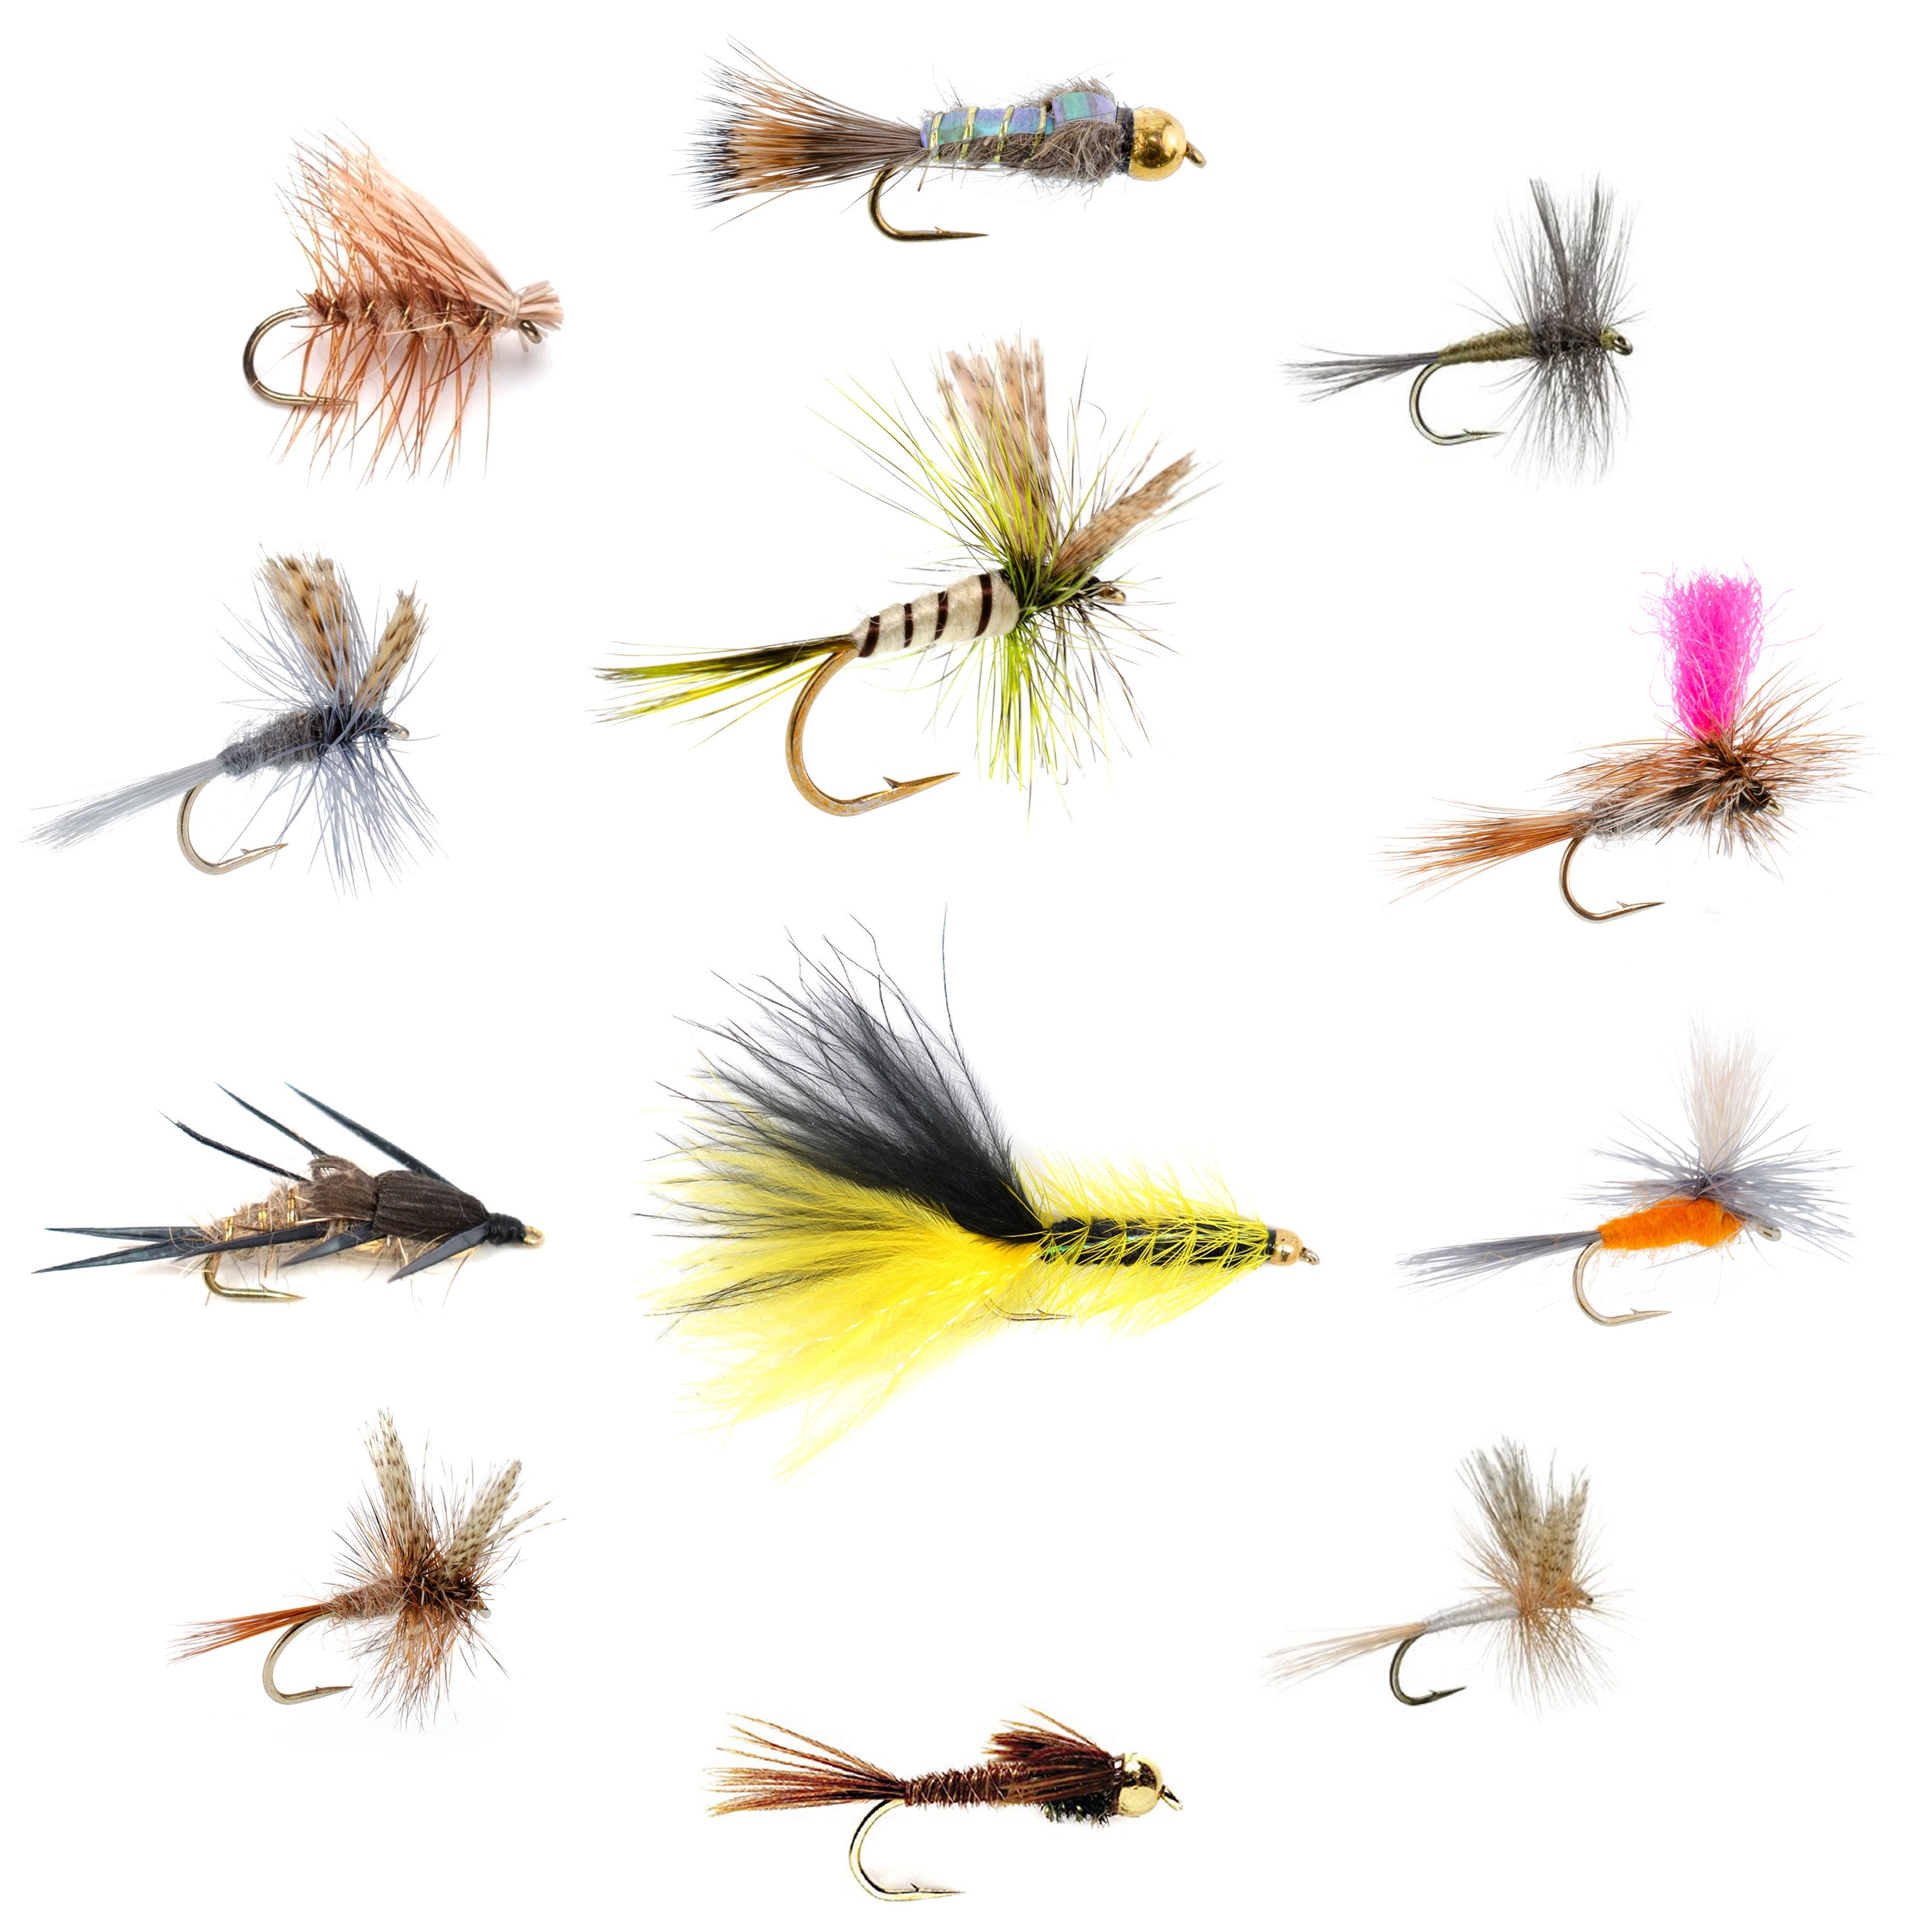 Eastern Trout Fly Assortment 12 Essential Dry and Nymph Fly